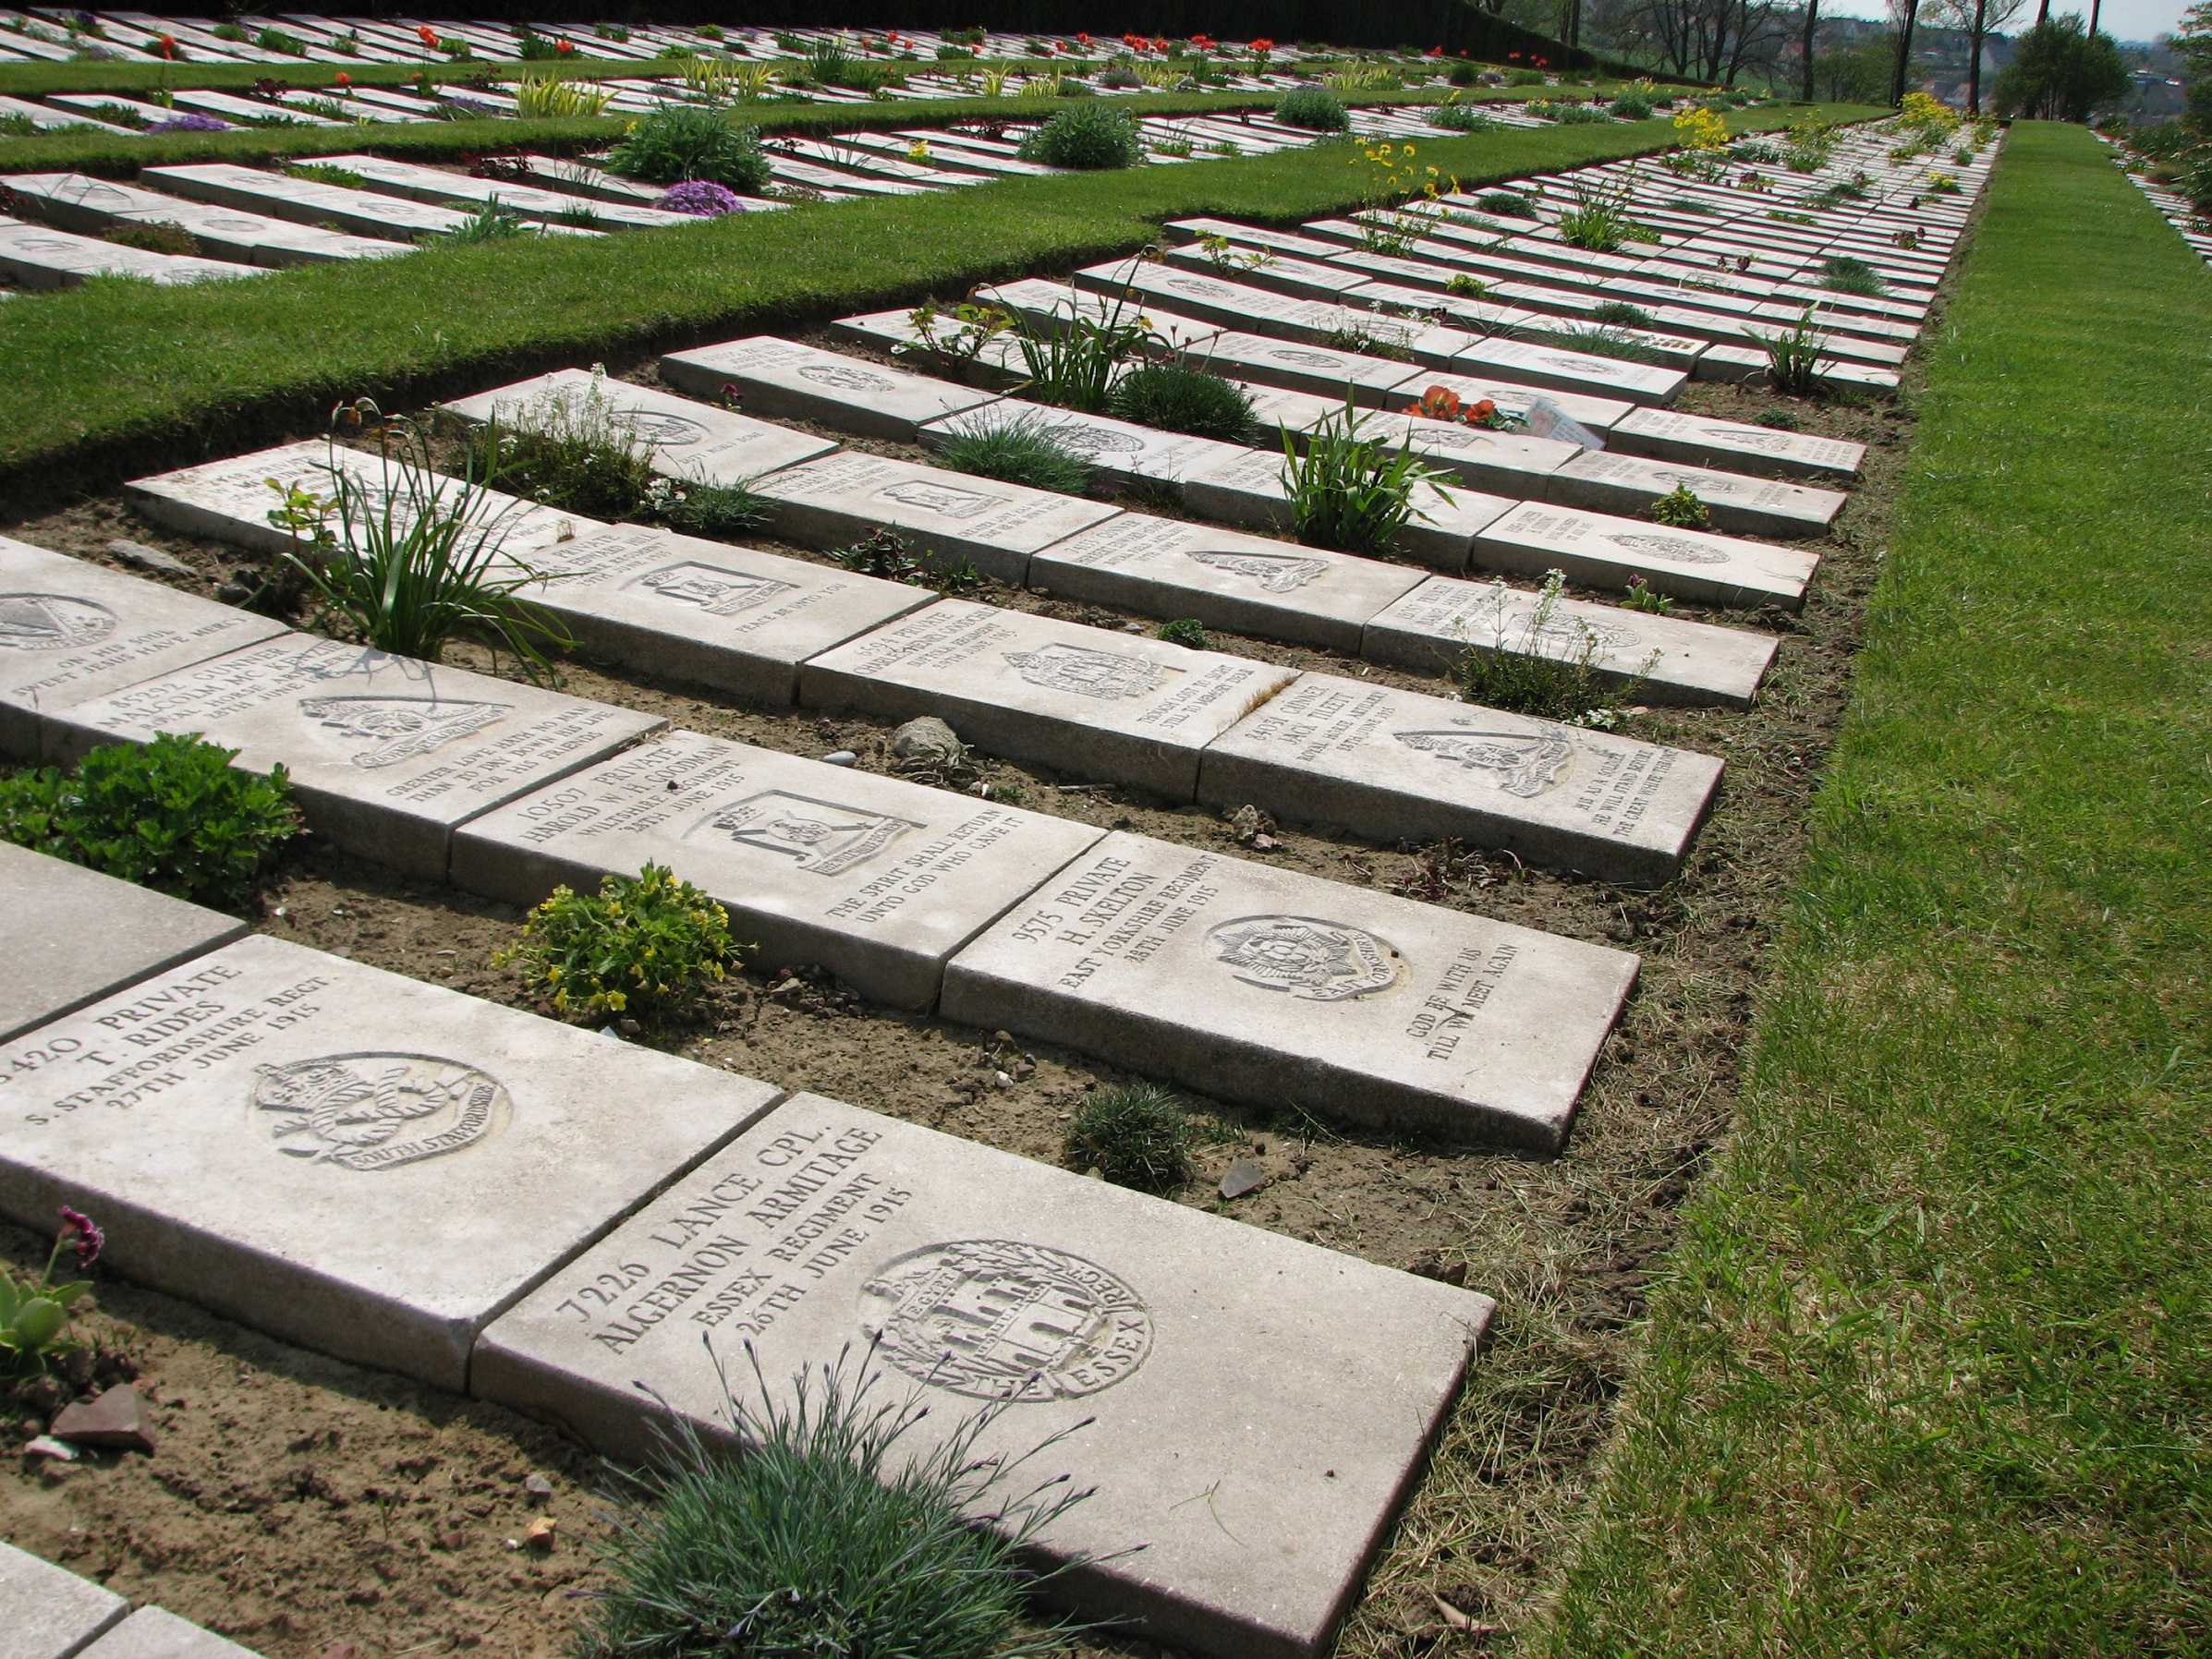 Algernon's Headstone (closest to the camera), Boulogne Eastern Cemetery<br>MA